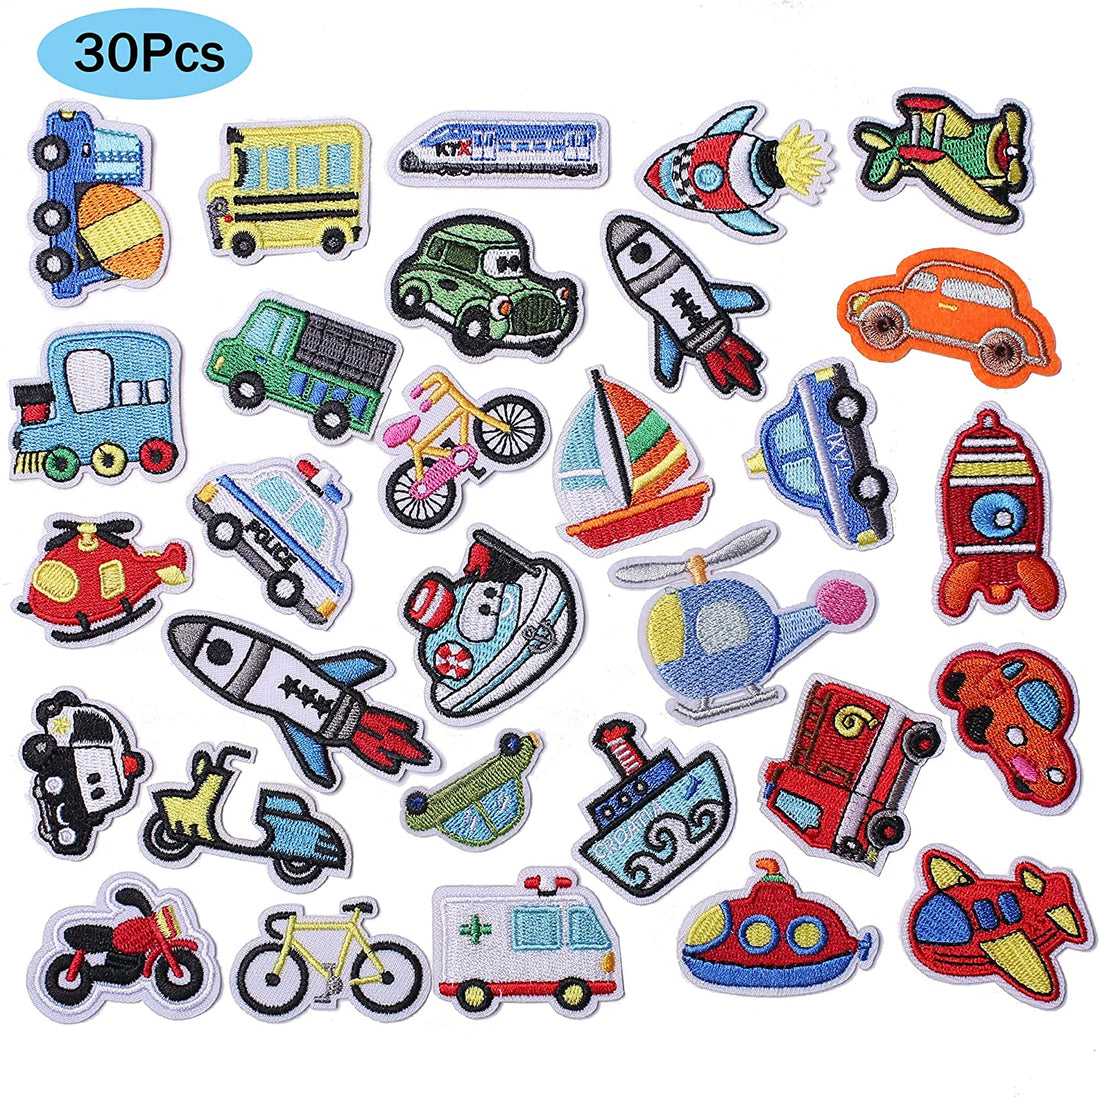 Car Embroidered Iron on Patch for Clothes, Iron-on Patches / Sew-on Appliques Patches for Clothing, Jackets, Backpacks, Caps, Jeans